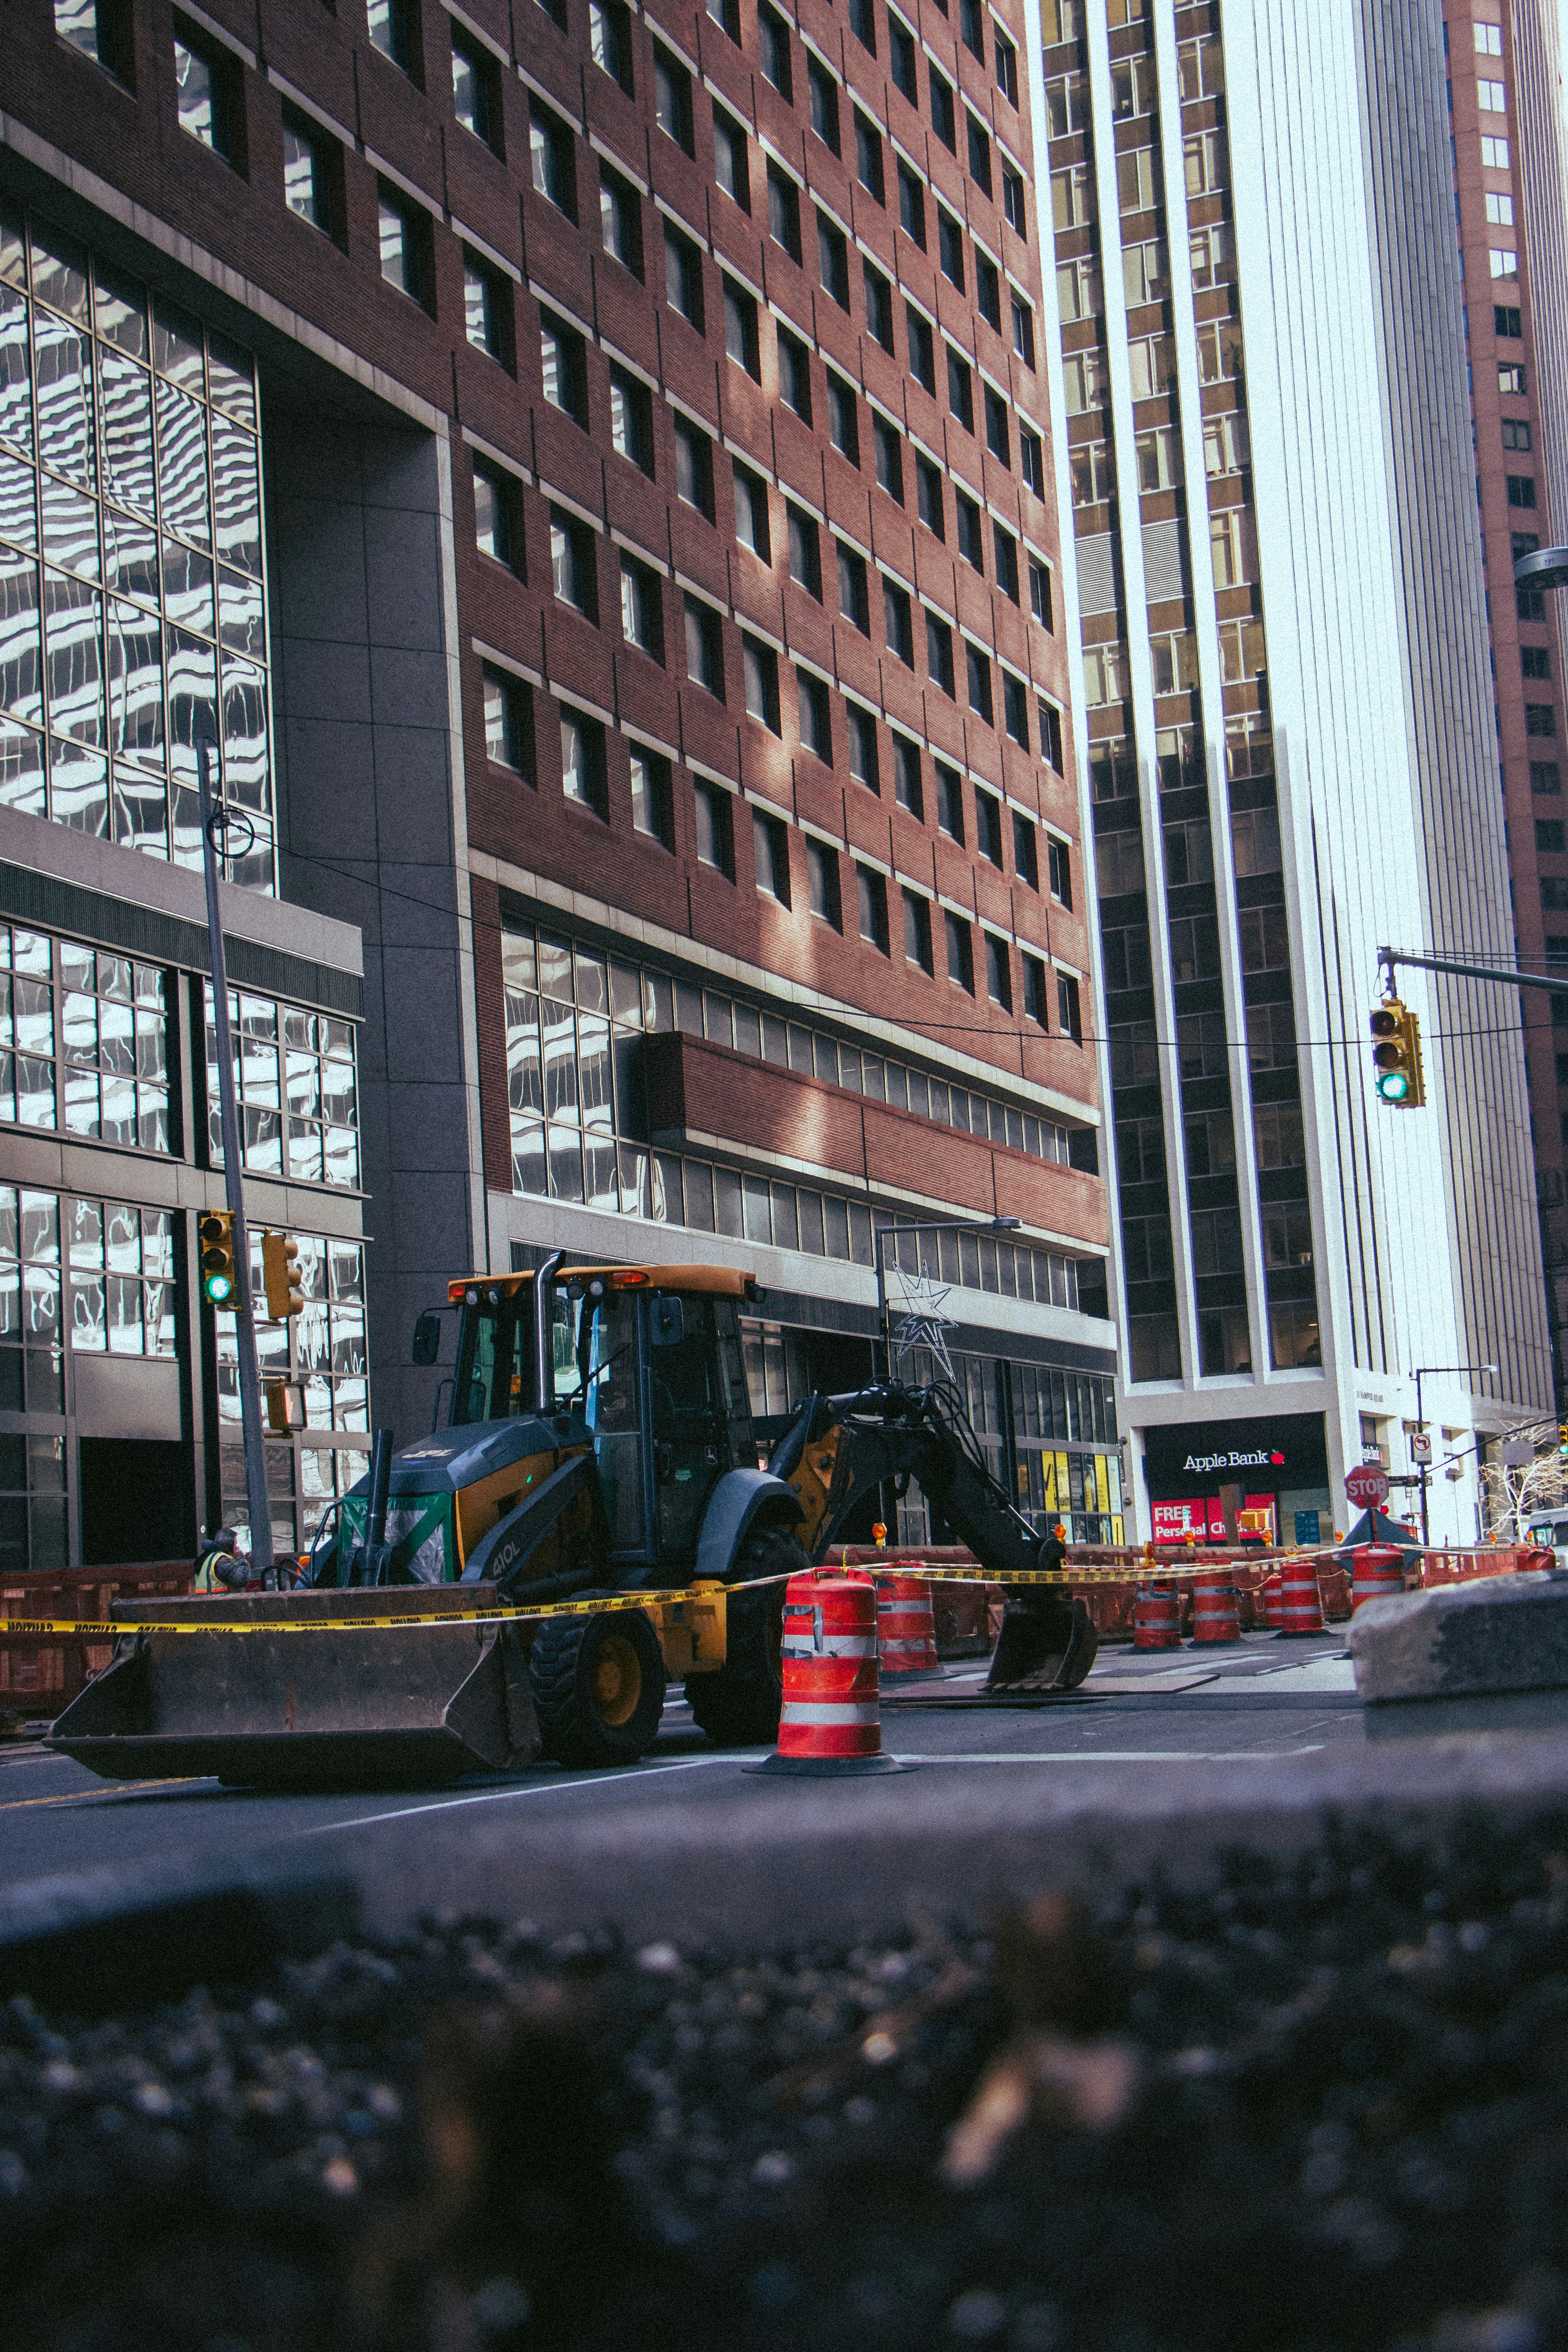 Construction in the streets of NYC